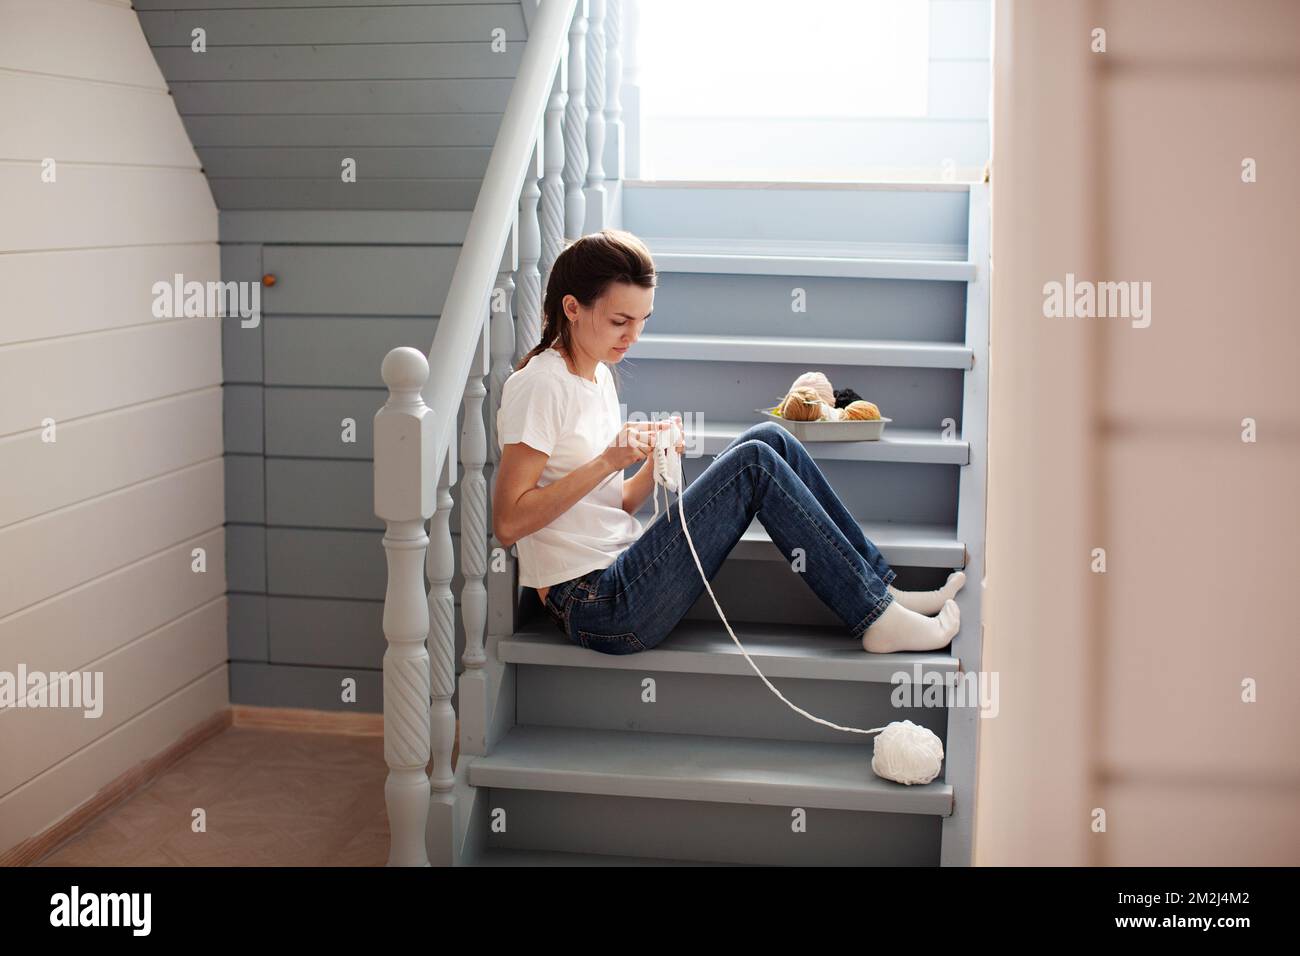 Calm woman knit white thread on circular knitting needles, sitting on steps in cozy wooden interior house. Crafting and handmade. Lifestyle and beauti Stock Photo